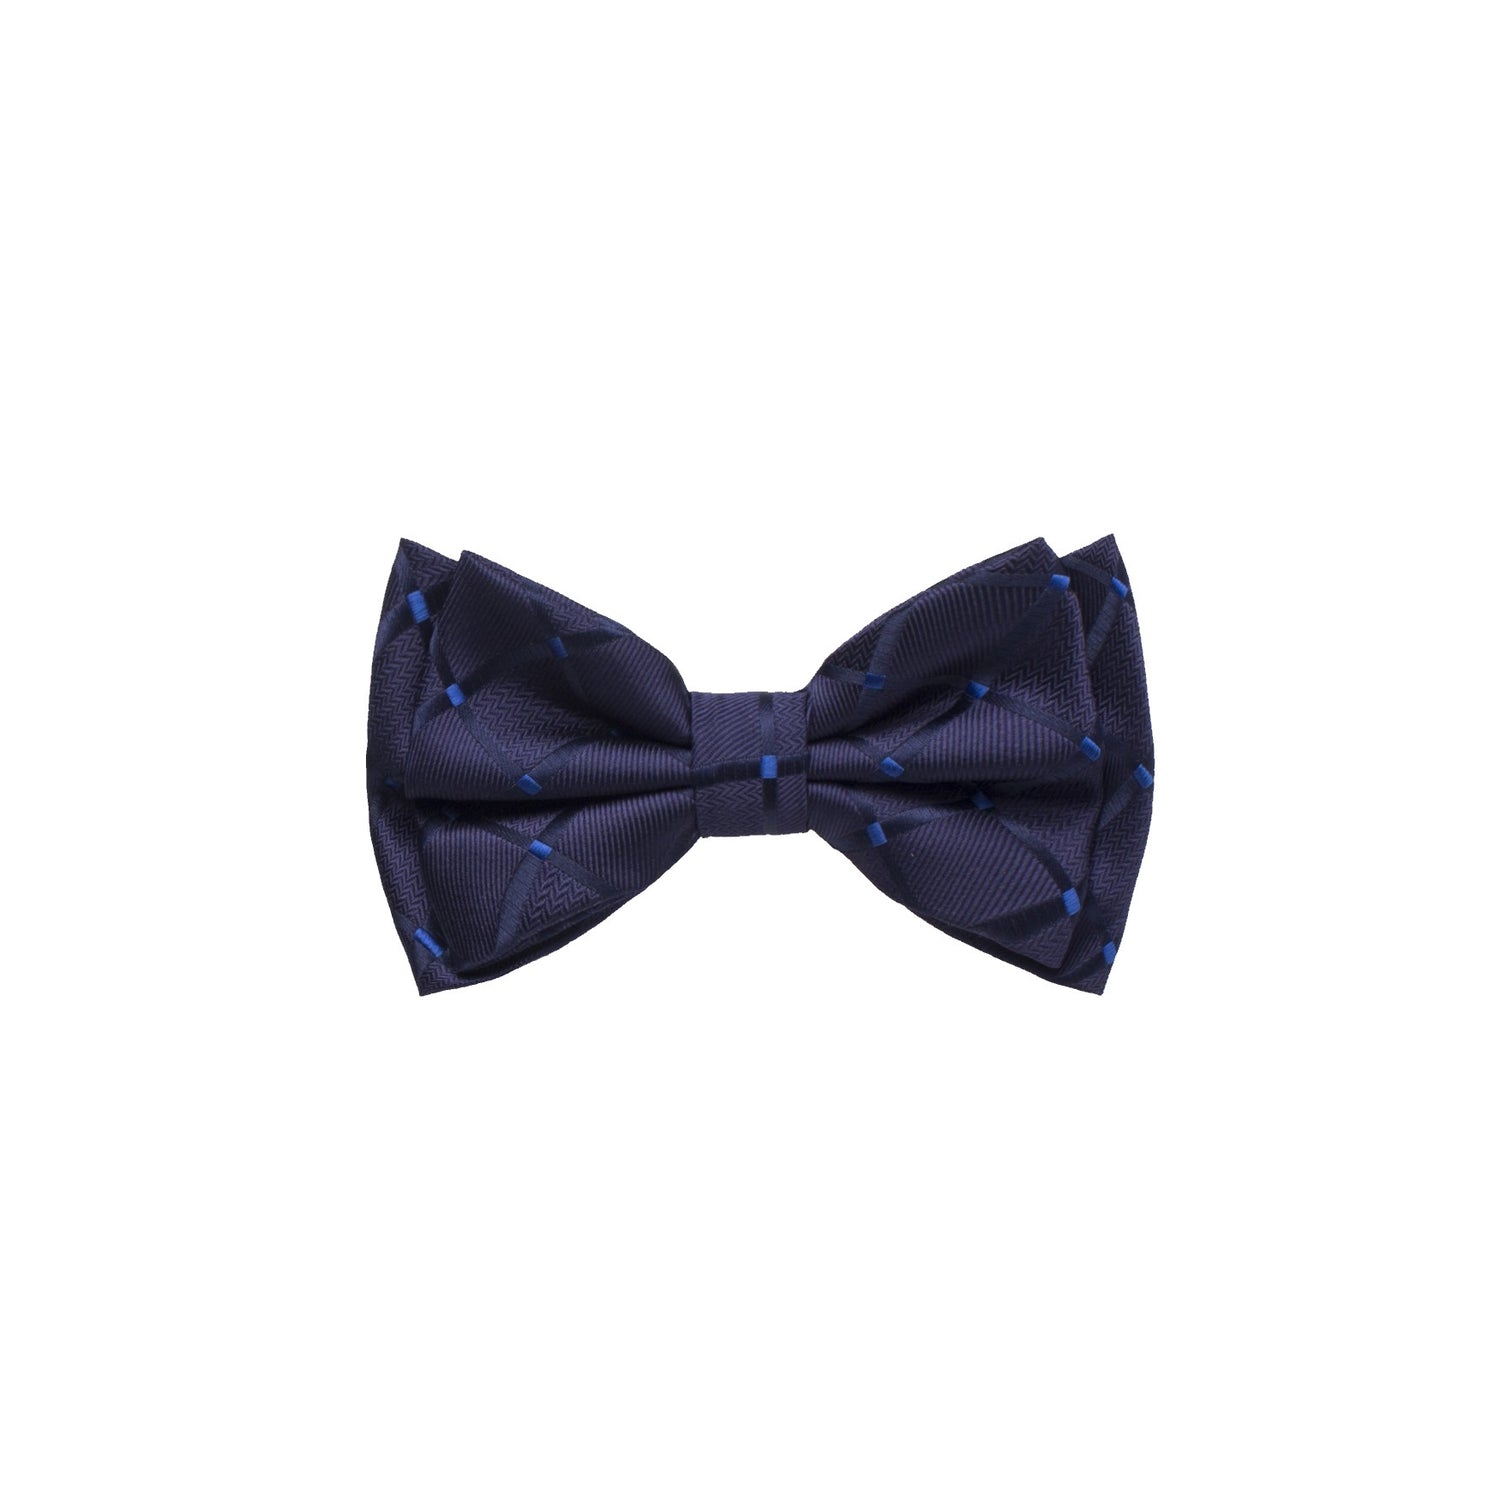 A Dark Blue With Geometric Check Texture Pattern Silk Kids Pre-Tied Bow Tie